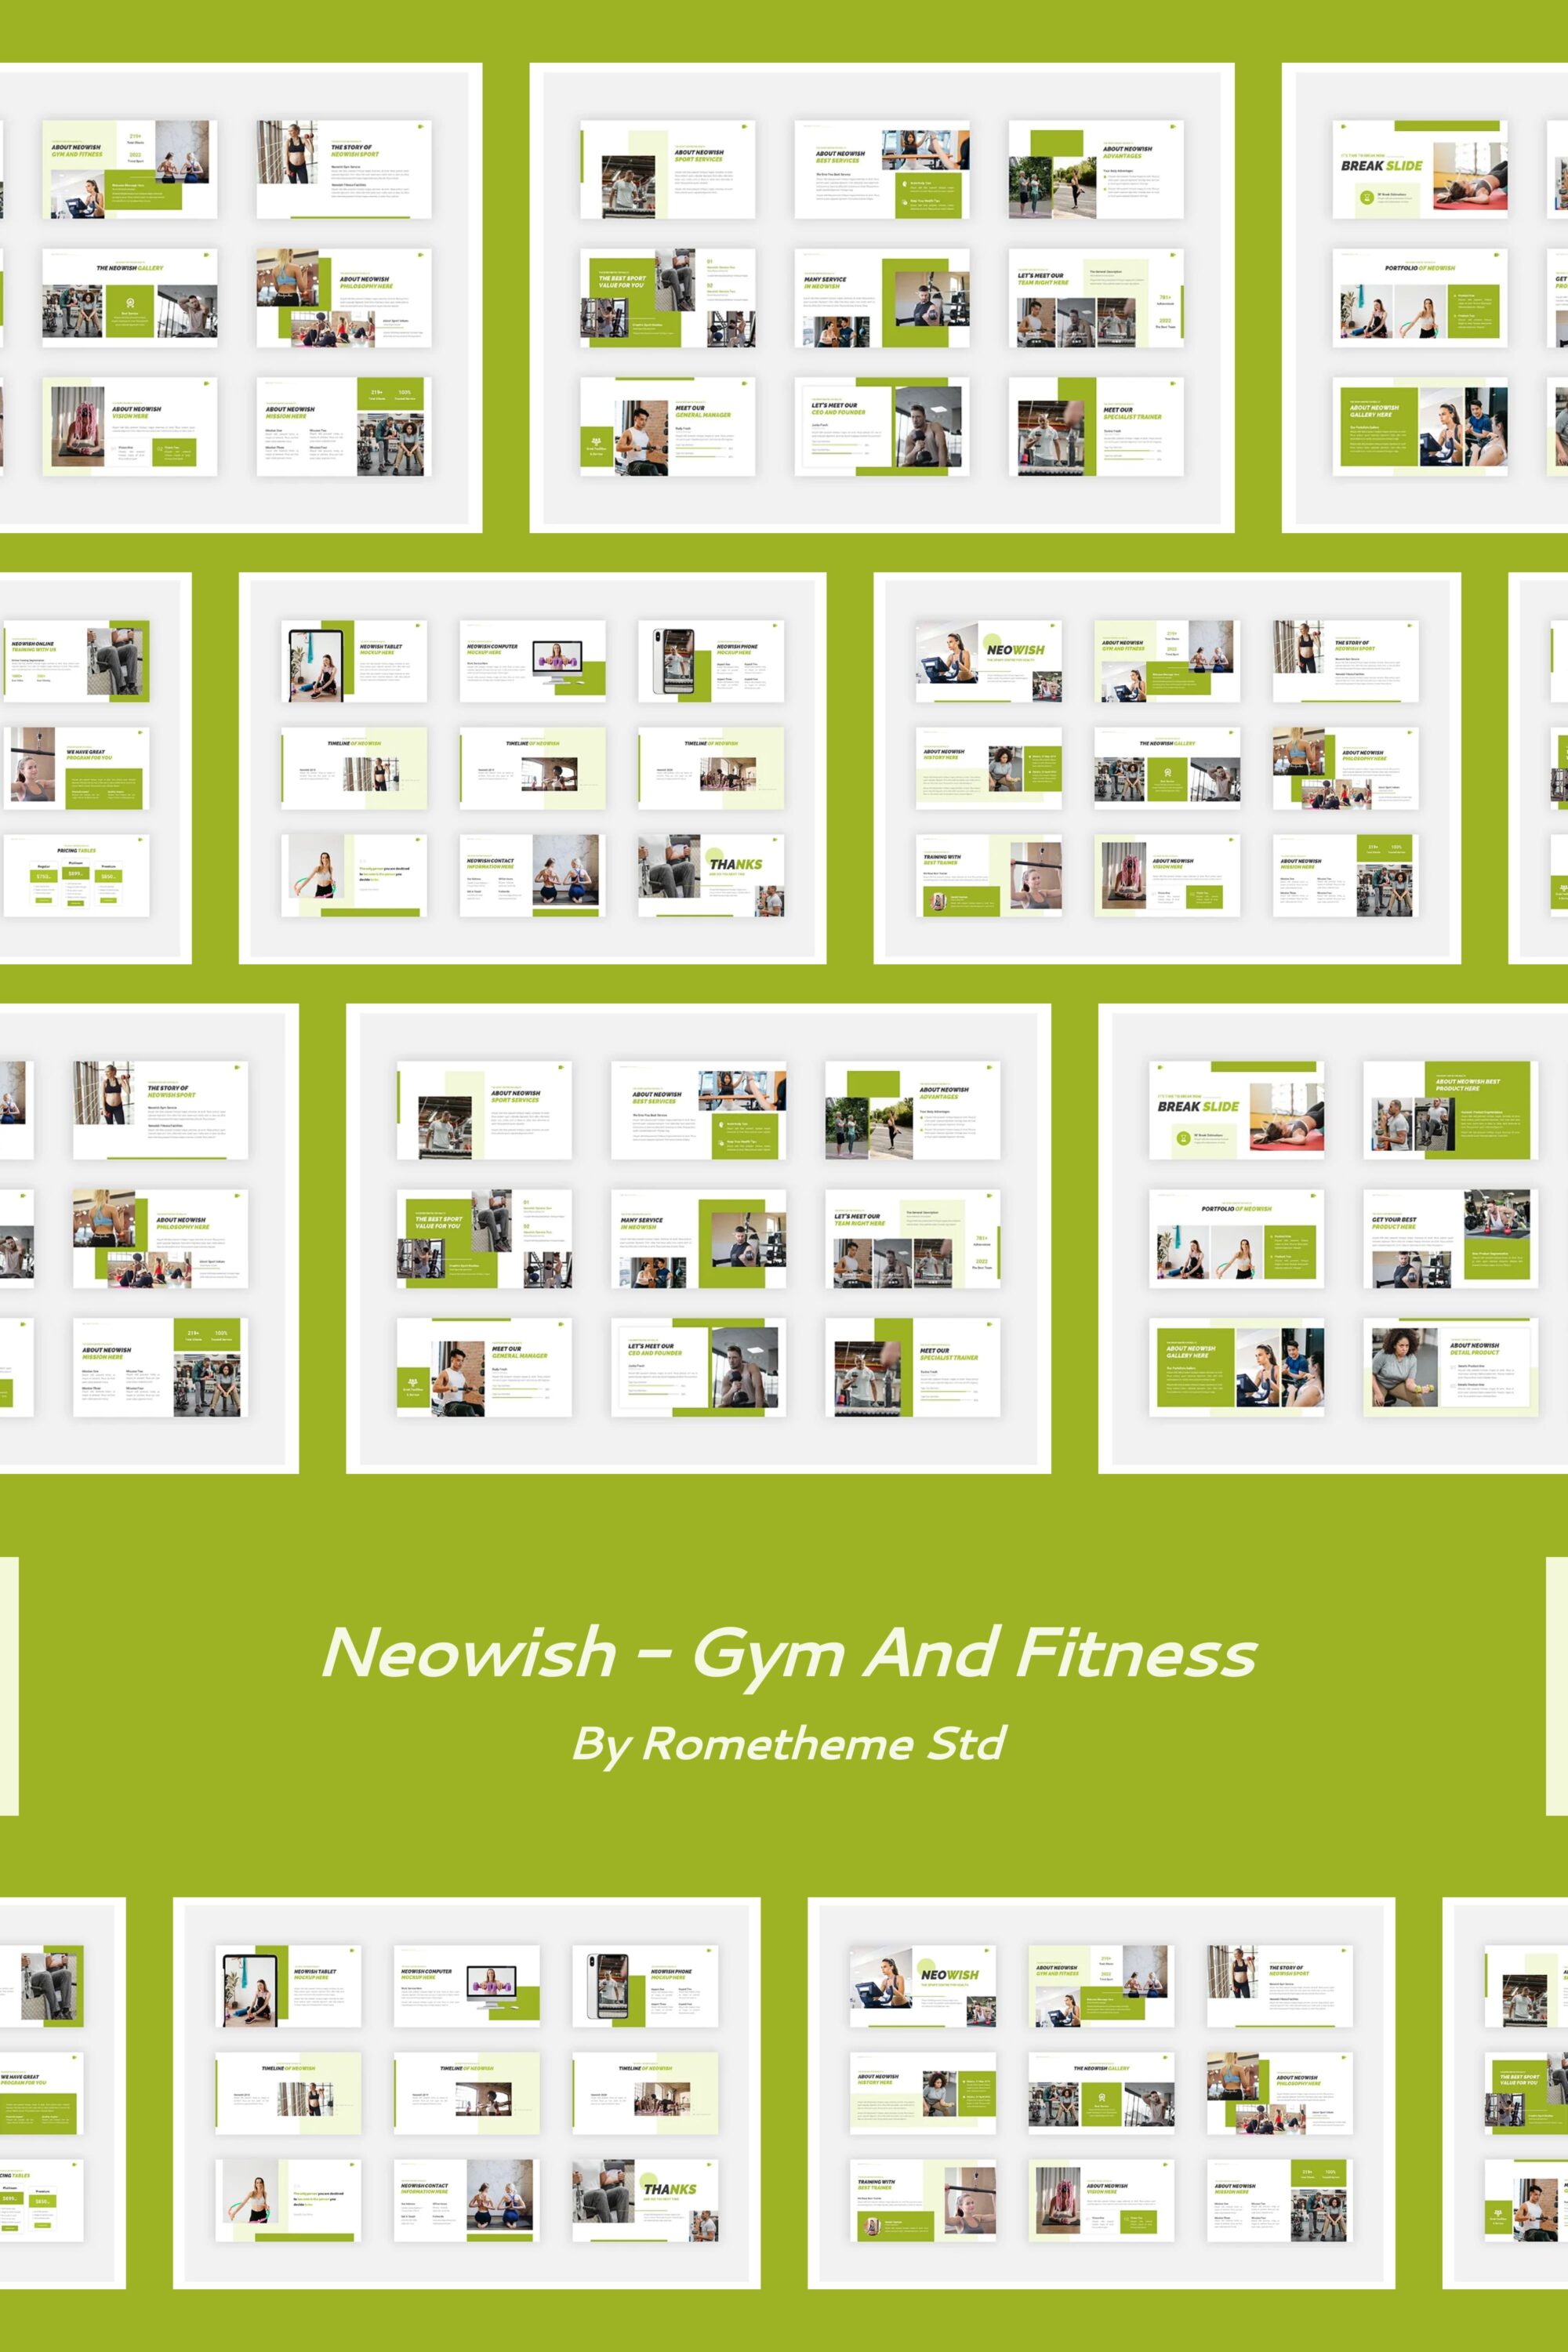 neowish gym and fitness 03